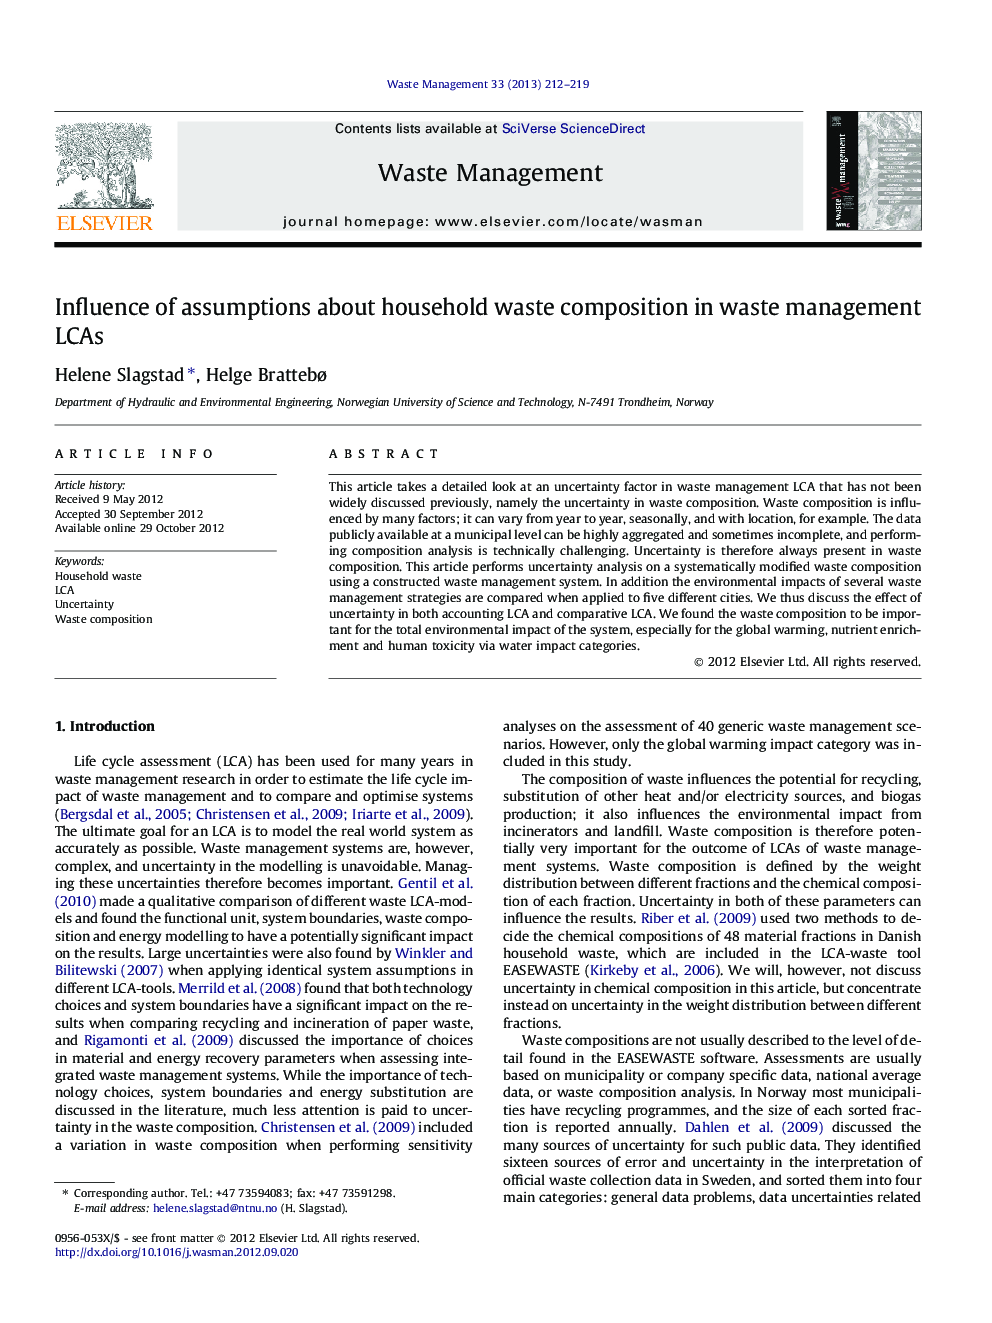 Influence of assumptions about household waste composition in waste management LCAs